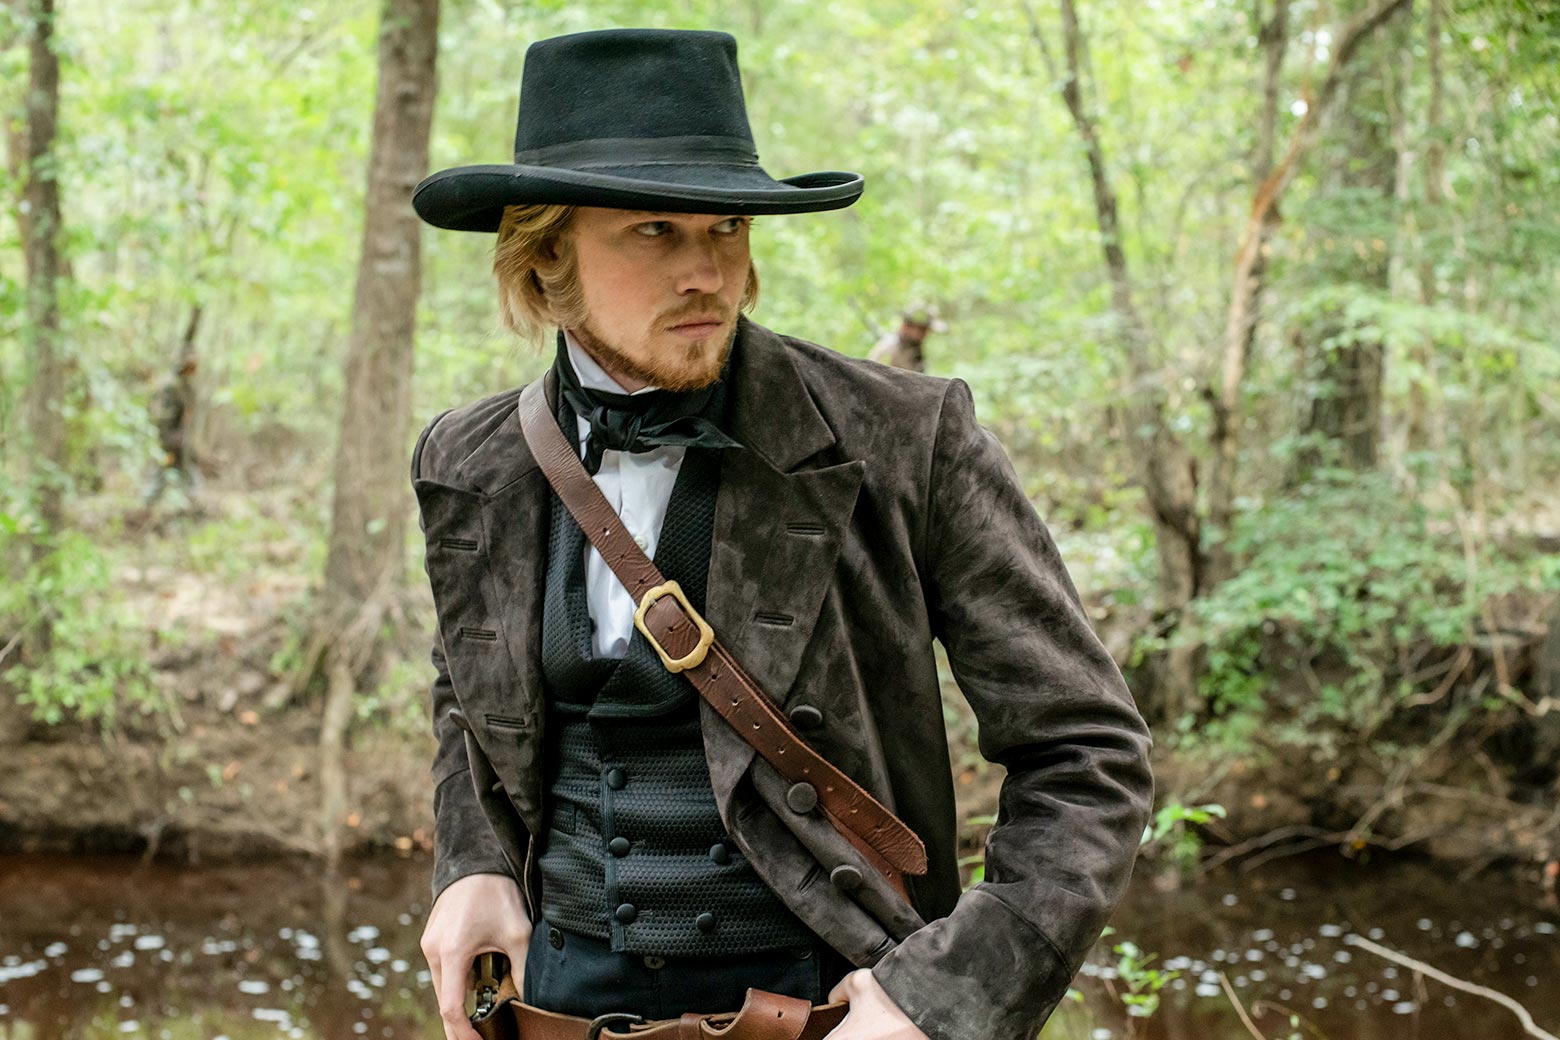 Joe Alwyn as Gideon, wearing 19th century garb and looking around in a forest.